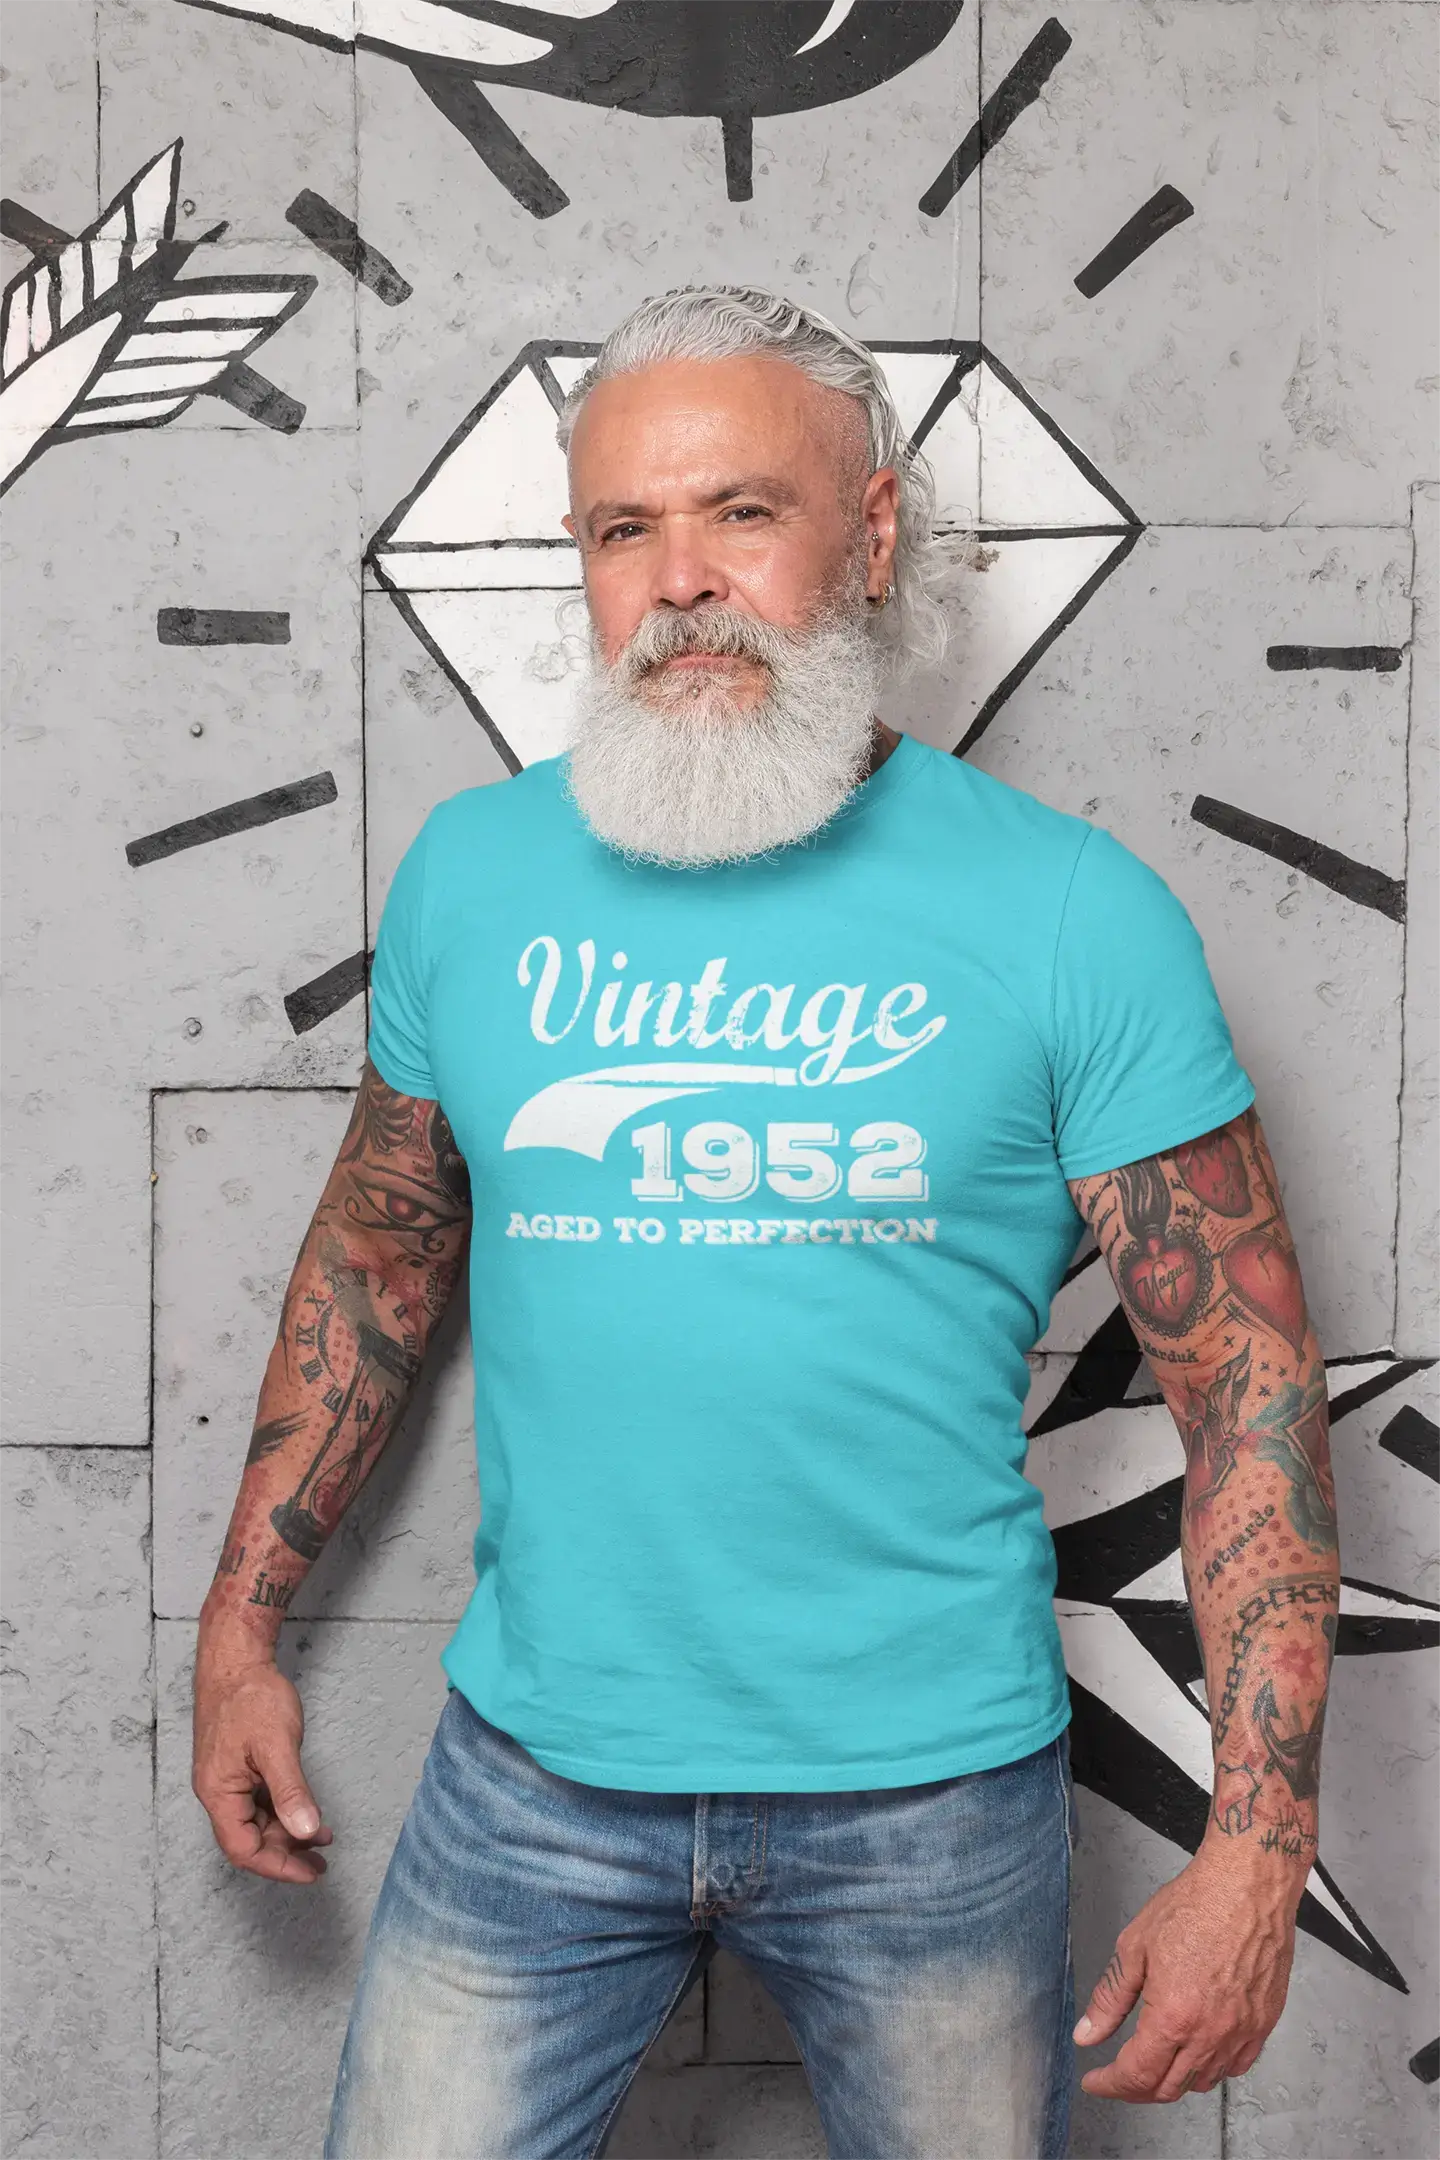 1952 Vintage Aged to Perfection, Blue, Men's Short Sleeve Round Neck T-shirt 00291